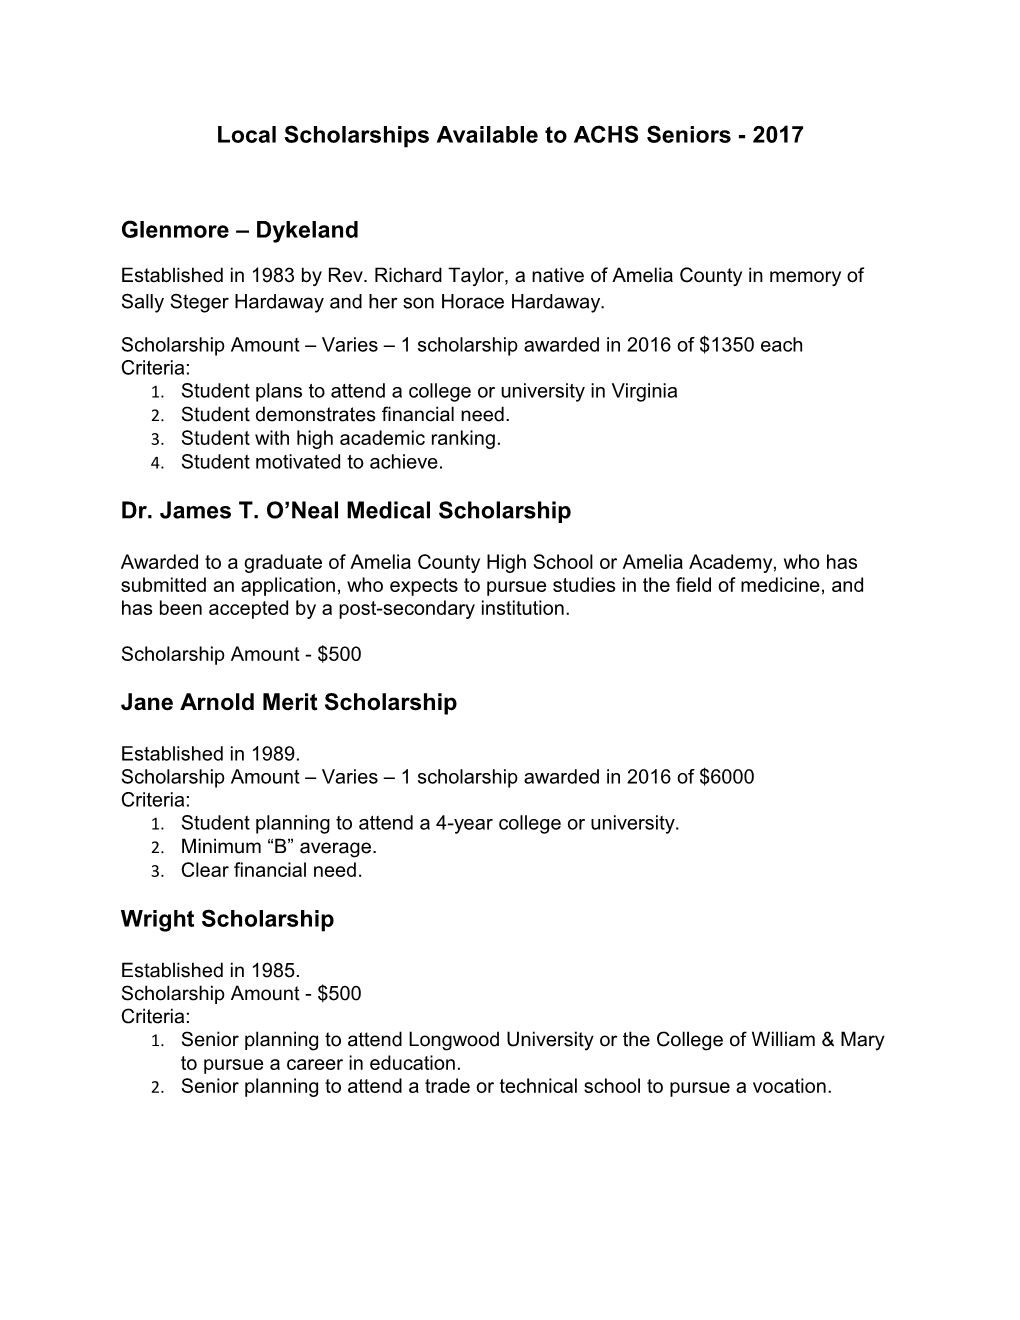 Local Scholarships Available to ACHS Seniors - 2017